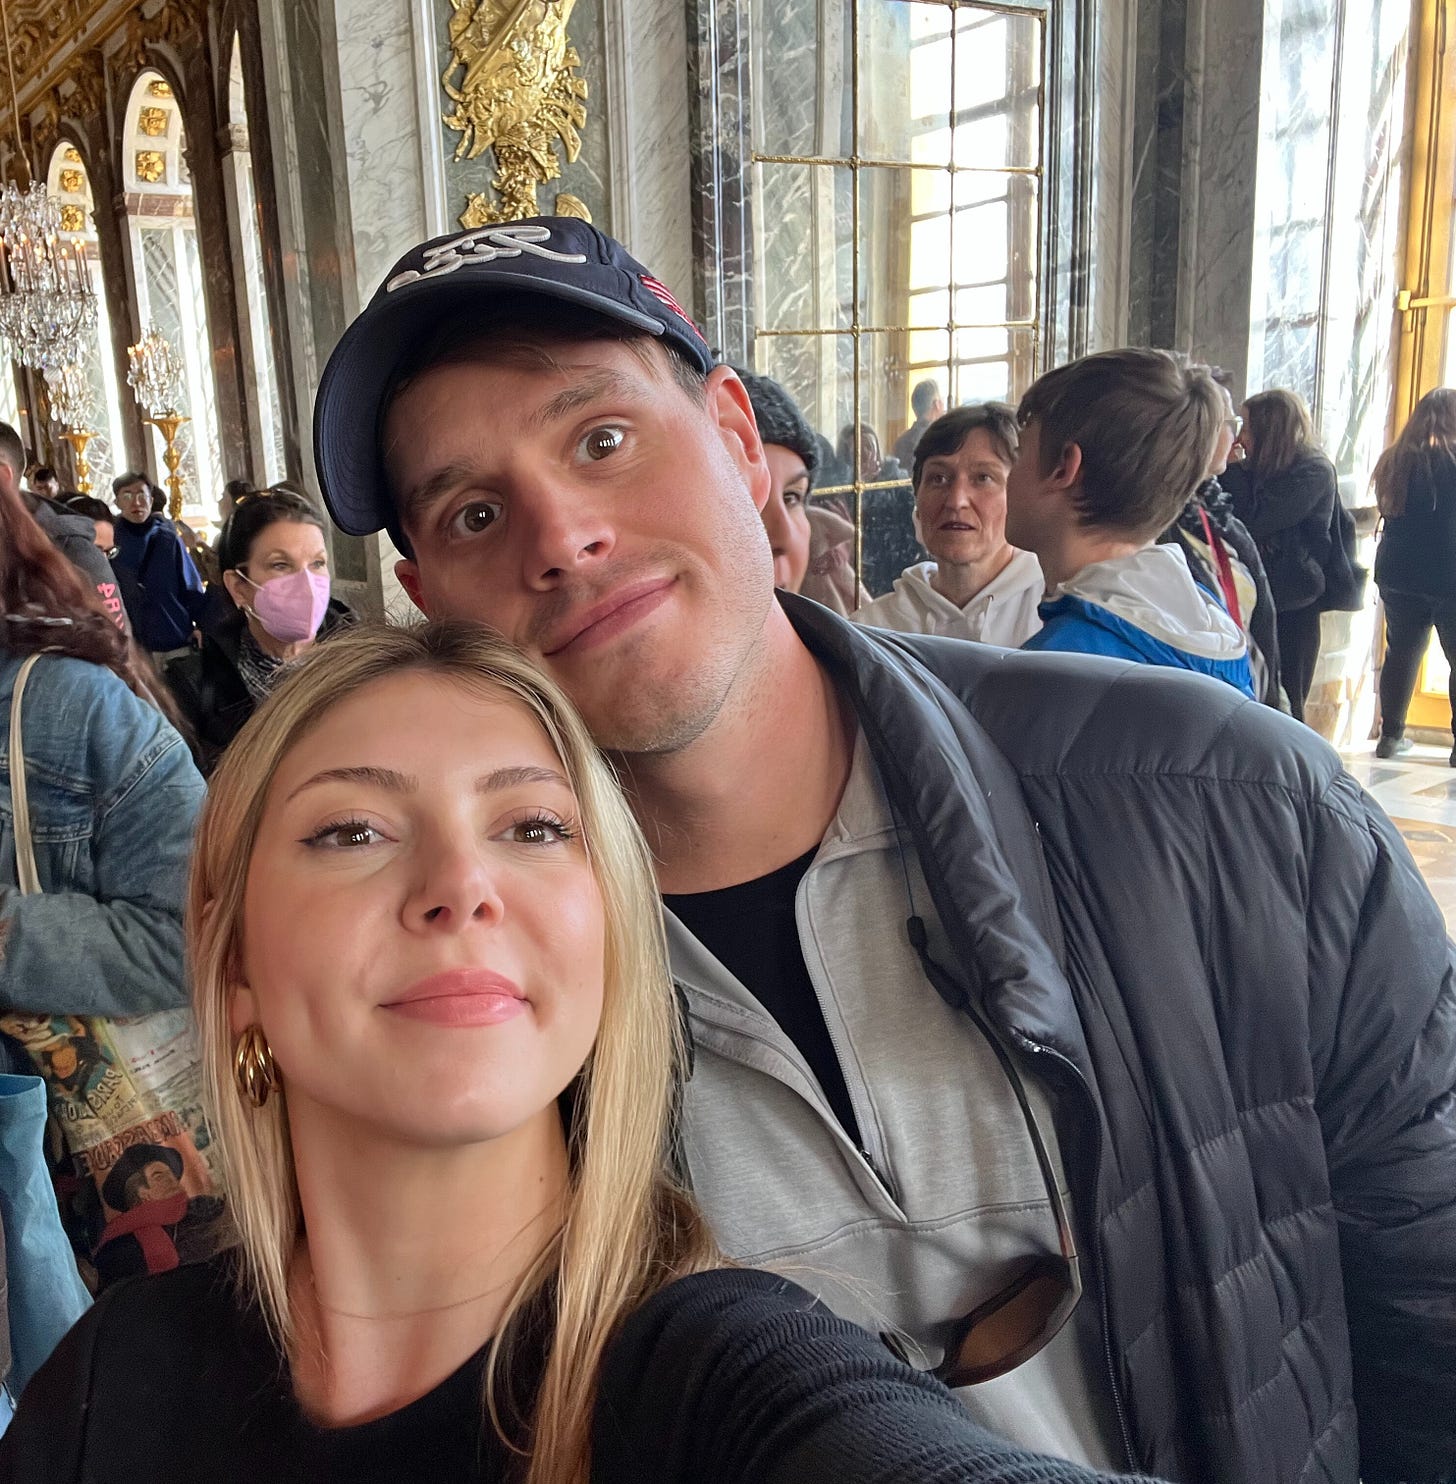 A man and woman with their heads touching, taking a selfie at the Palace of Versailles